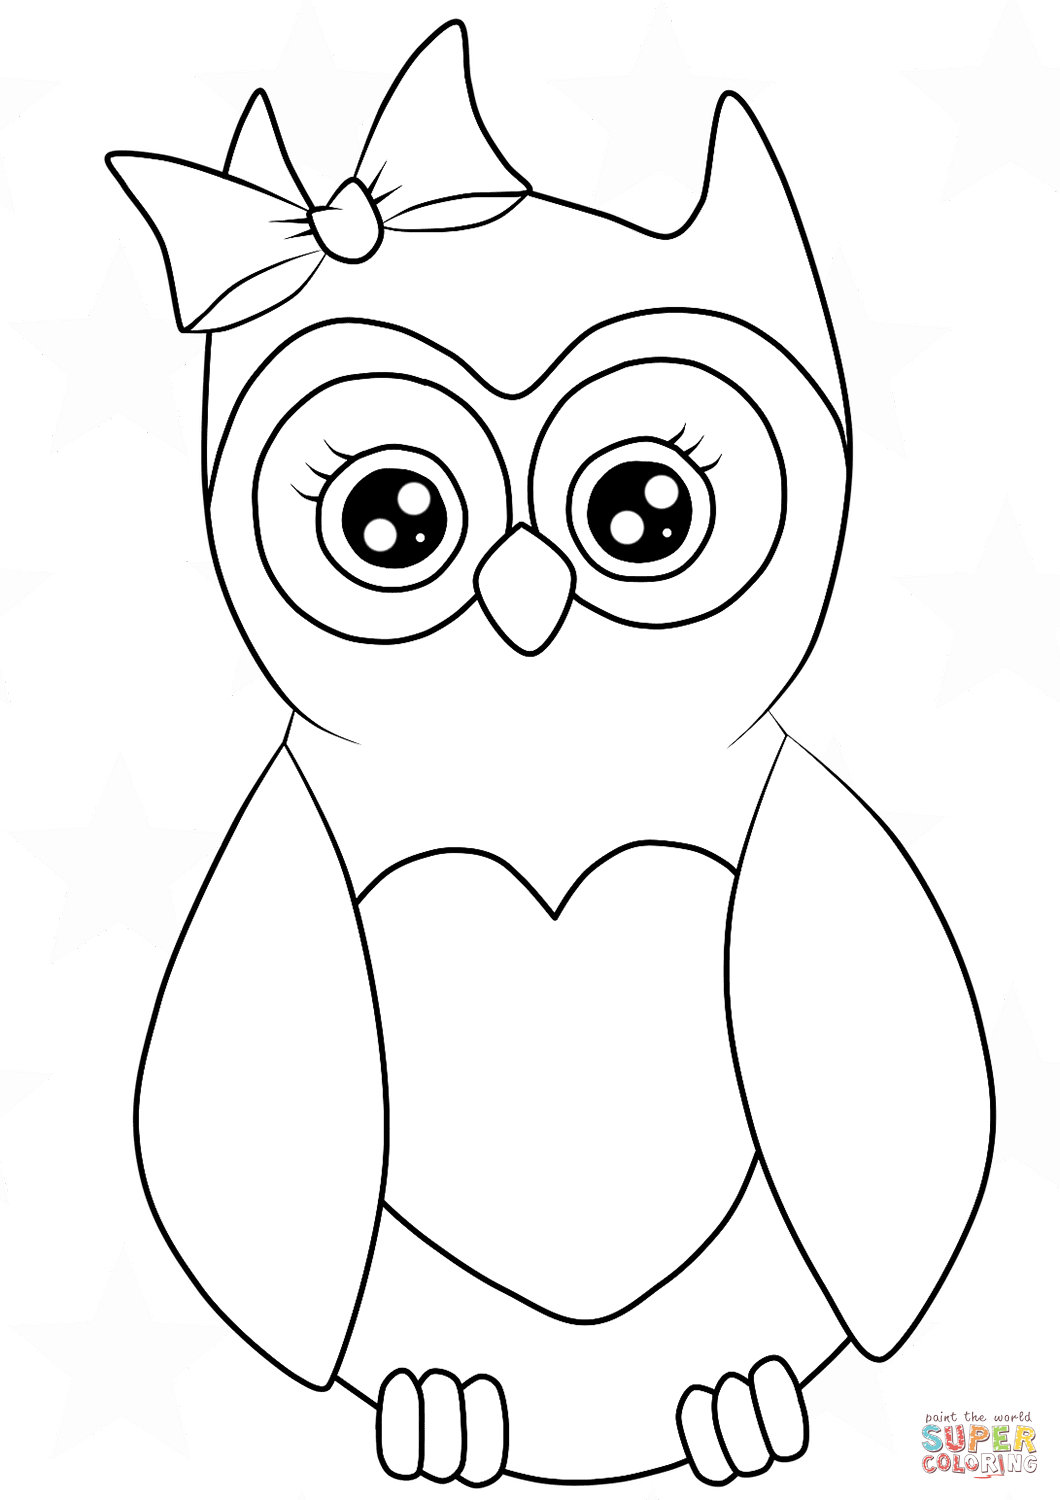 Cutest cartoon owl coloring page free printable coloring pages